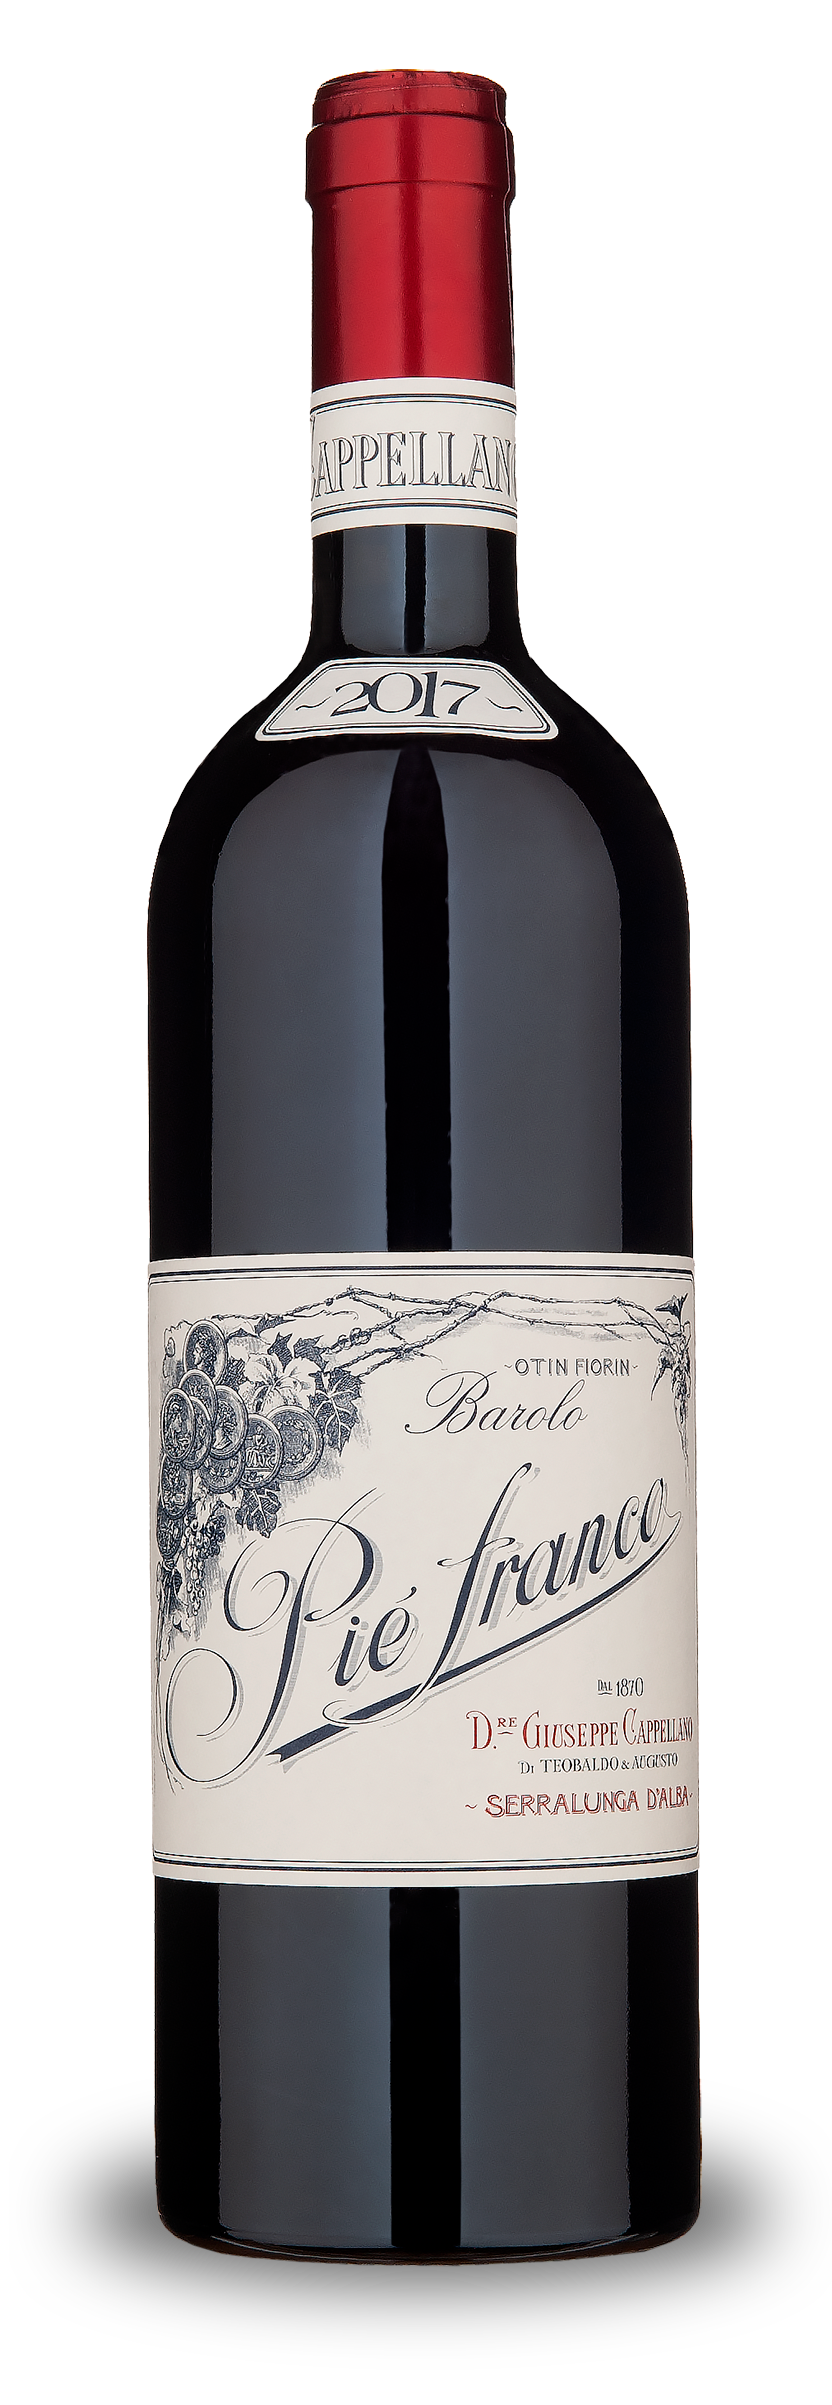 Barolo Piè Franco 2003 - ONLY ON PRE-ALLOCATION Contact us for further information (indulge@flemmings.wine)